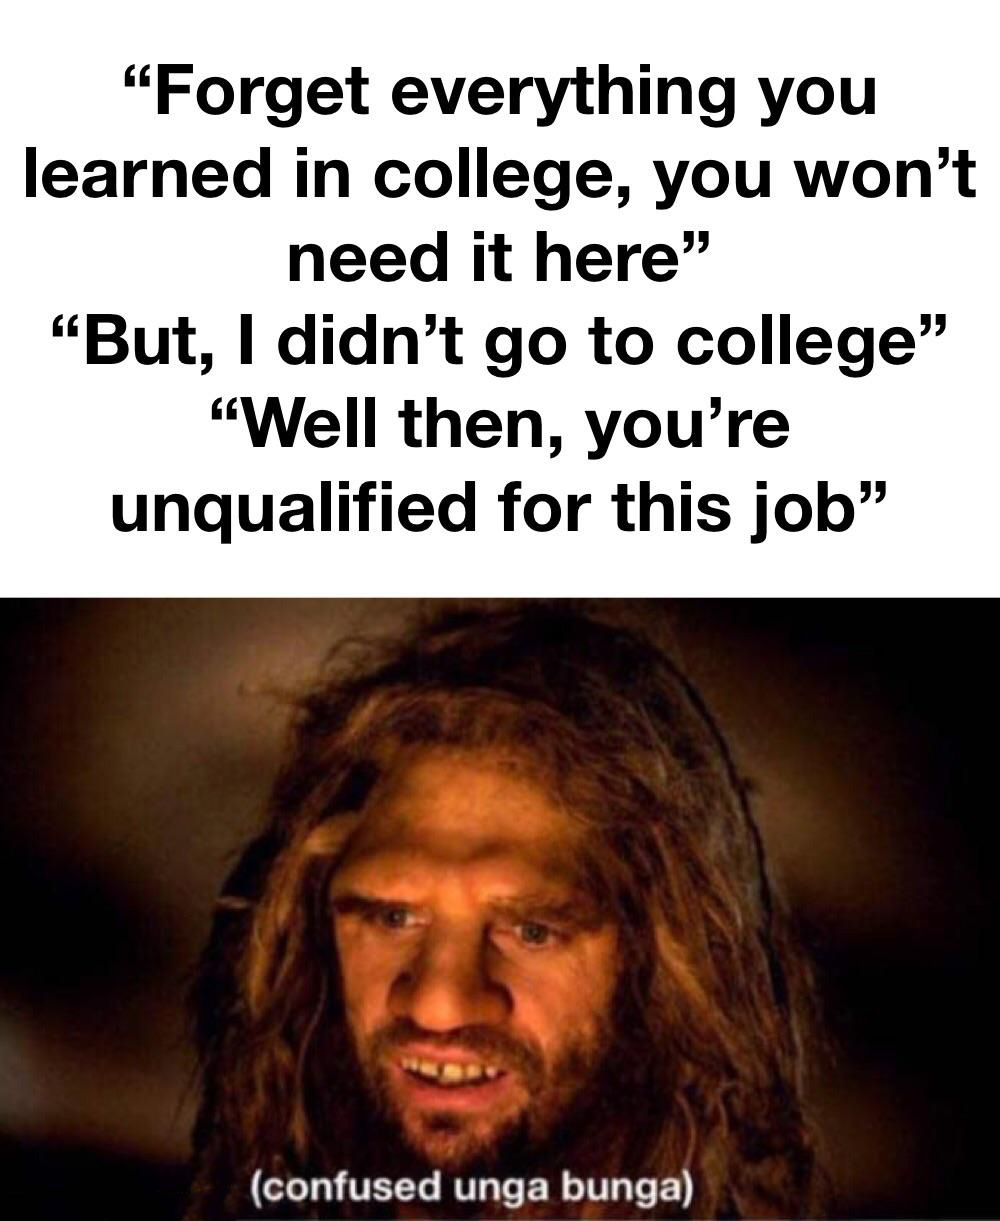 confused unga bunga meme - "Forget everything you learned in college, you won't need it here" But, I didn't go to college" Well then, you're unqualified for this job" confused unga bunga